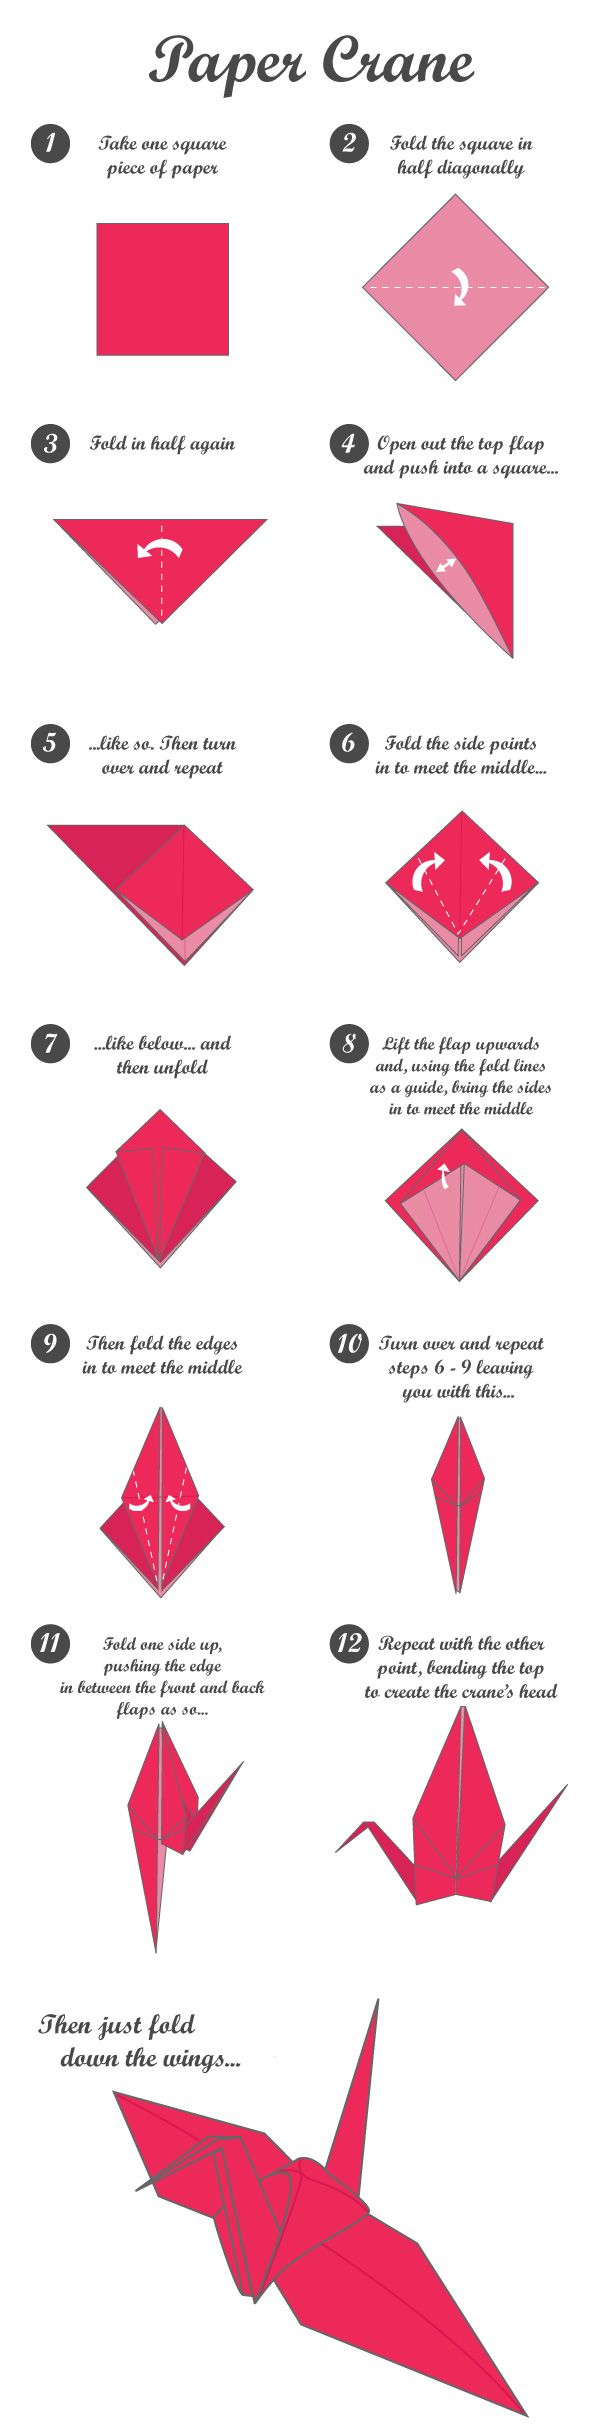 How To Make An Origami Crane Step By Step Origami Flapping Crane Step Step Beautiful Origami Flapping Bird